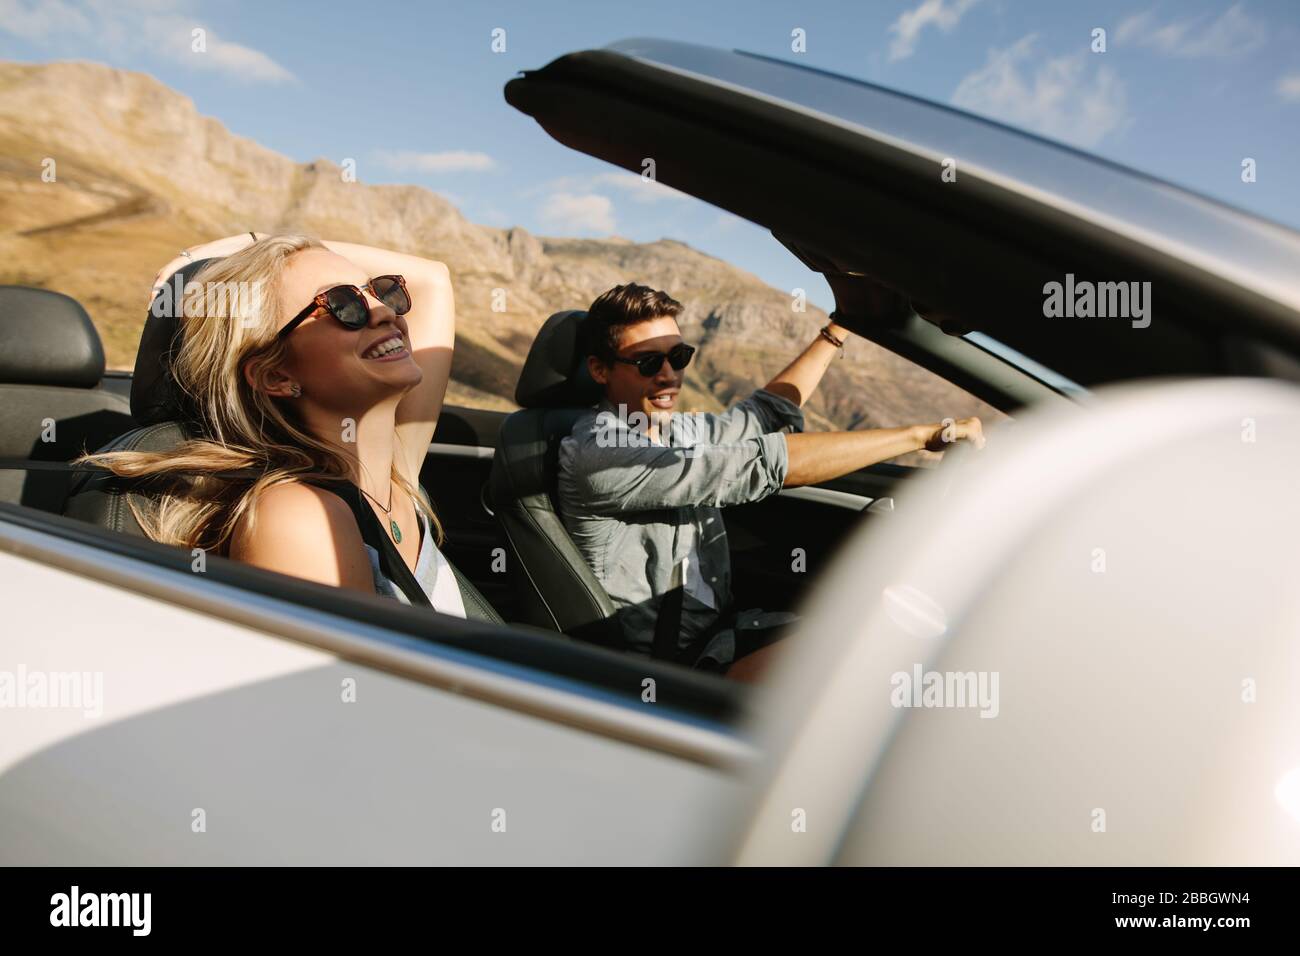 Cheerful couple having fun on a road trip. Young man driving convertible car with woman smiling on passenger seat. Stock Photo